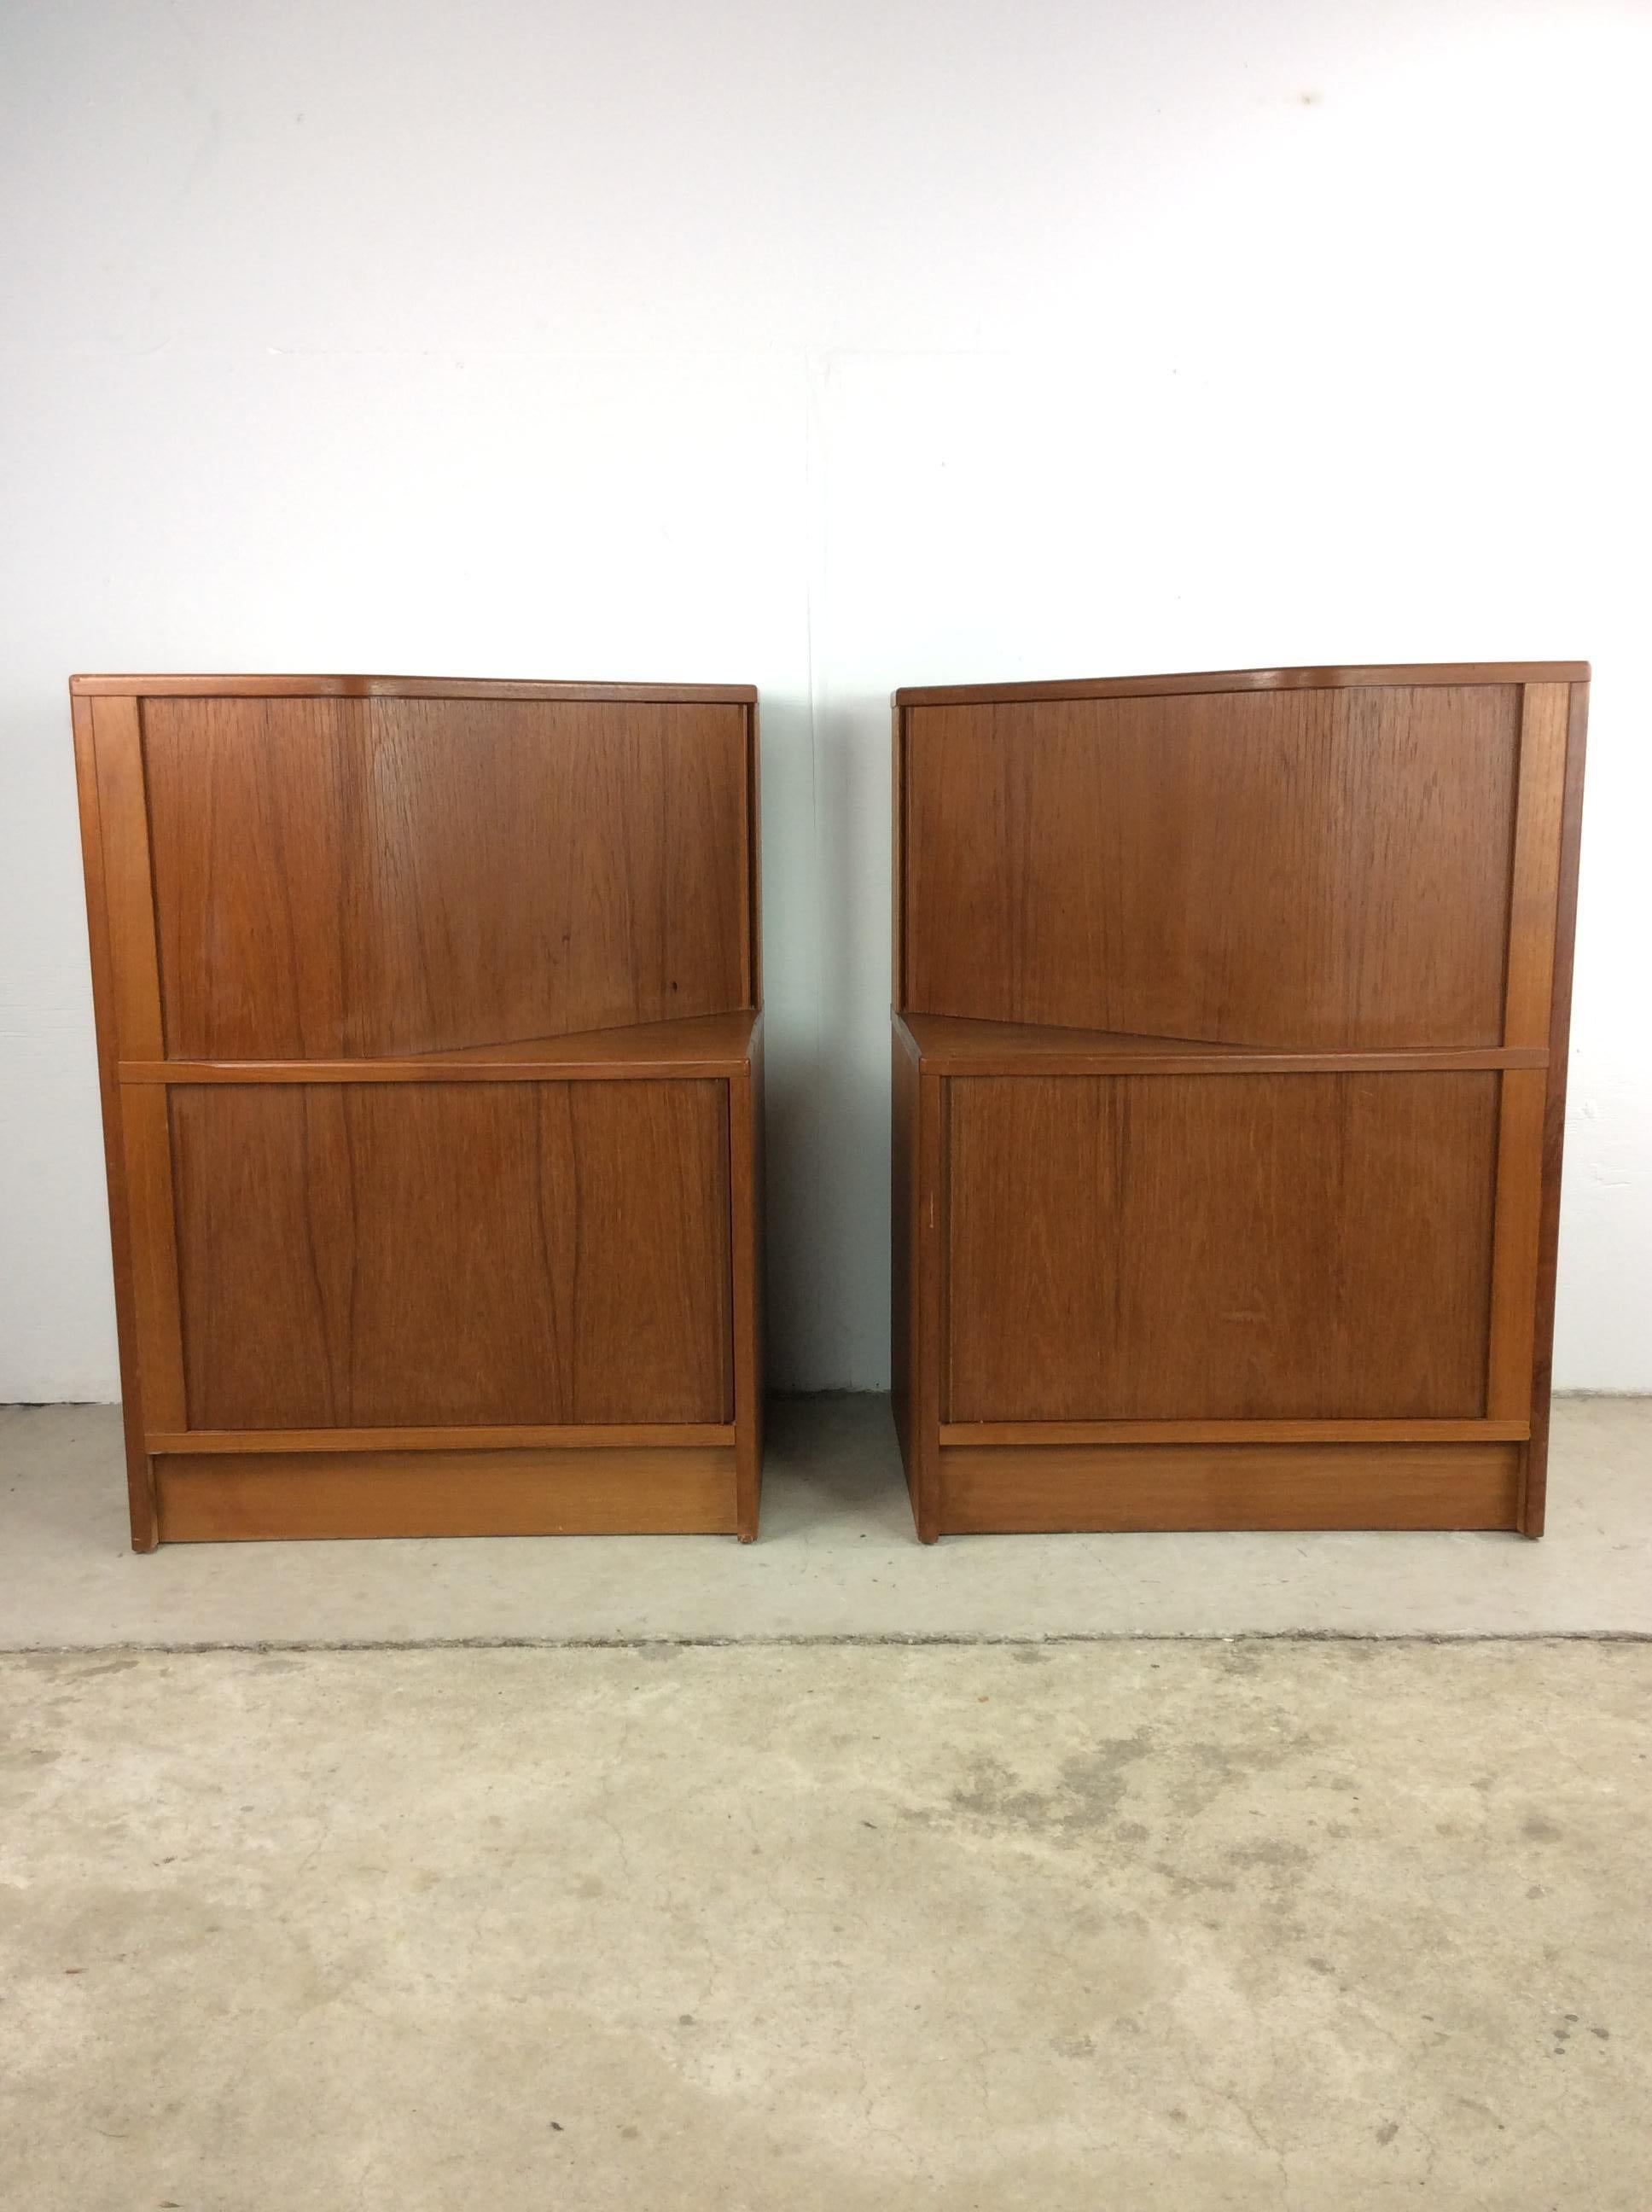 This pair of danish modern nightstands feature pressed wood construction, original teak finish, open storage up top with shelving down below, and each compartment has its own tambour door.

Complimentary large dresser / armoire available separately.